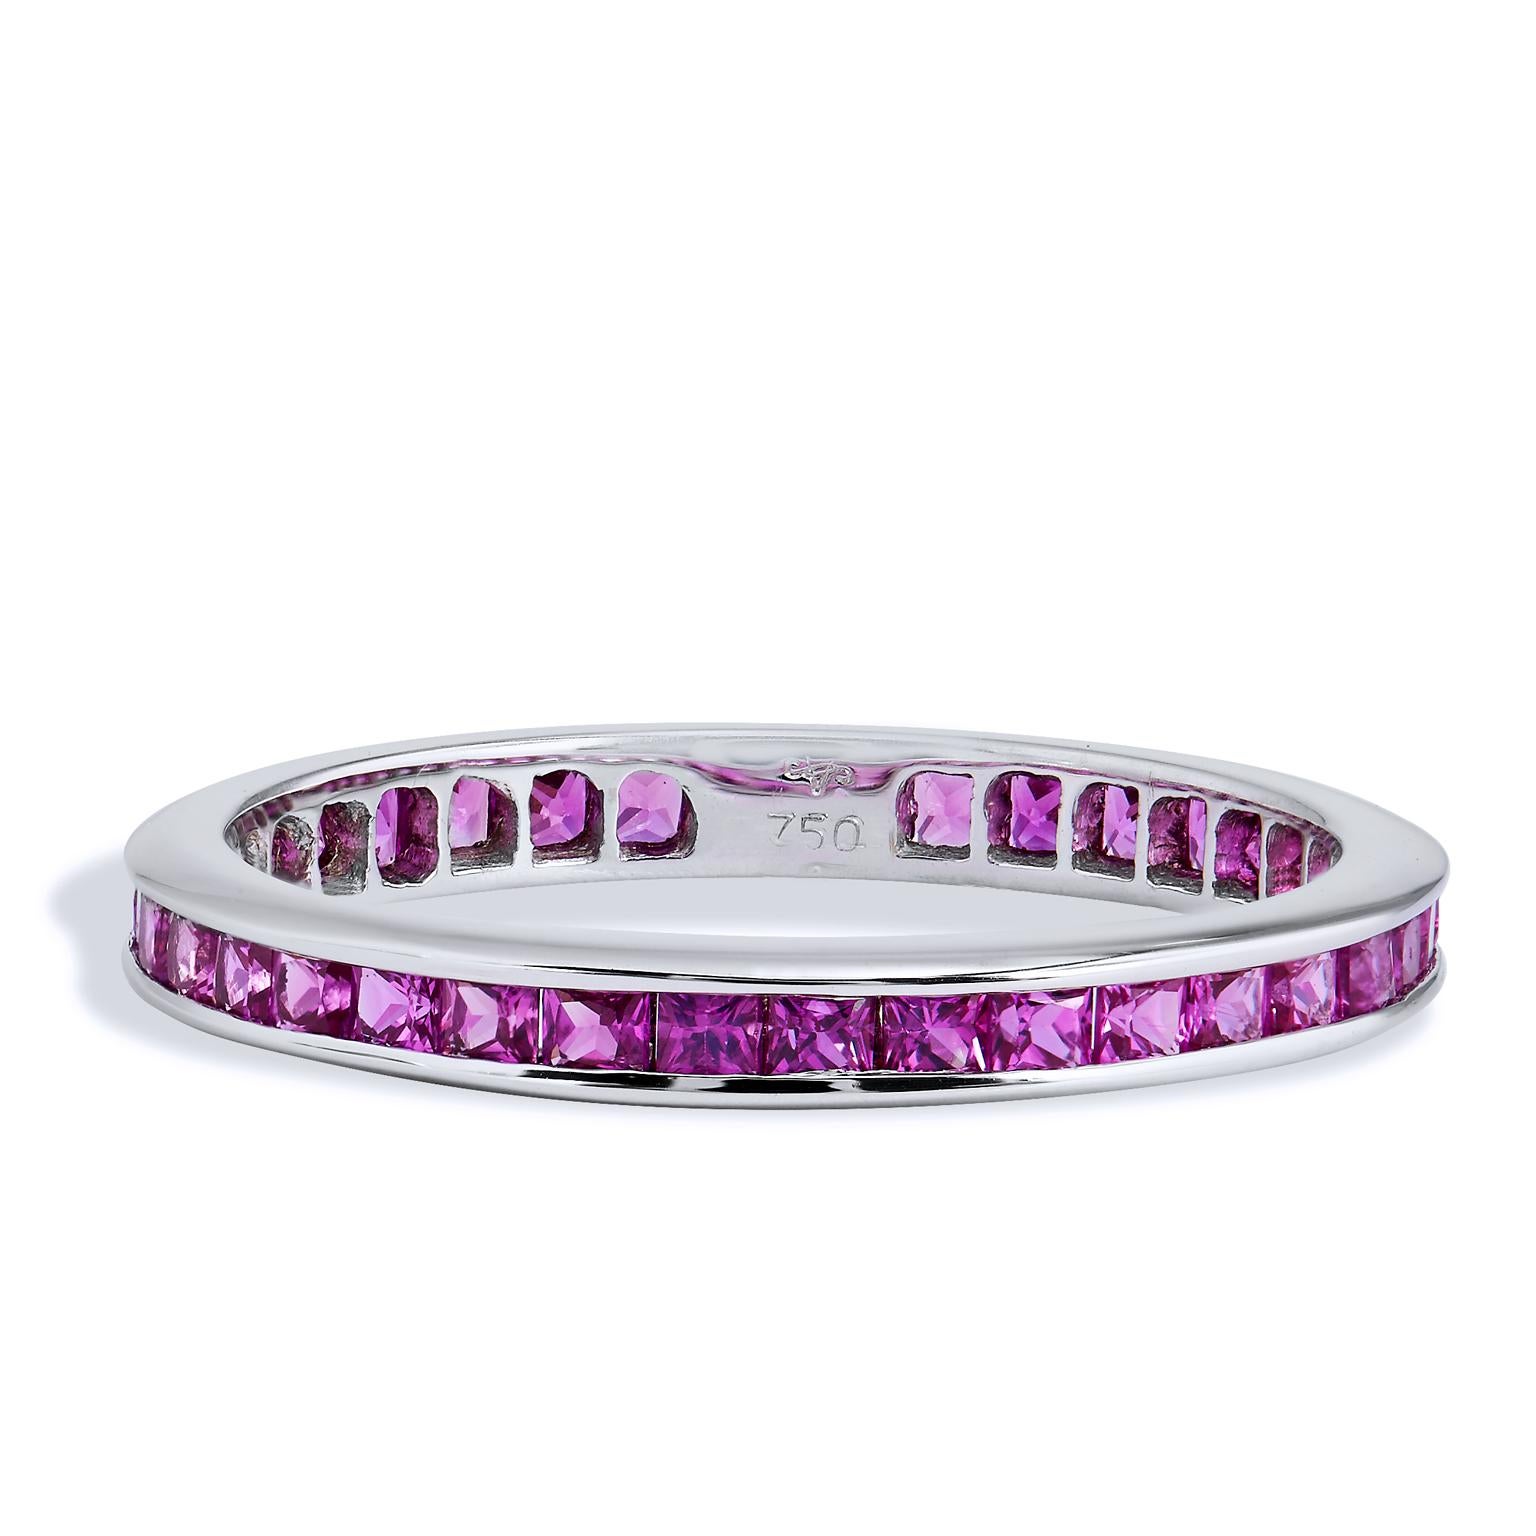 Women's Princess Cut Pink Sapphire Band Ring 6.5 For Sale